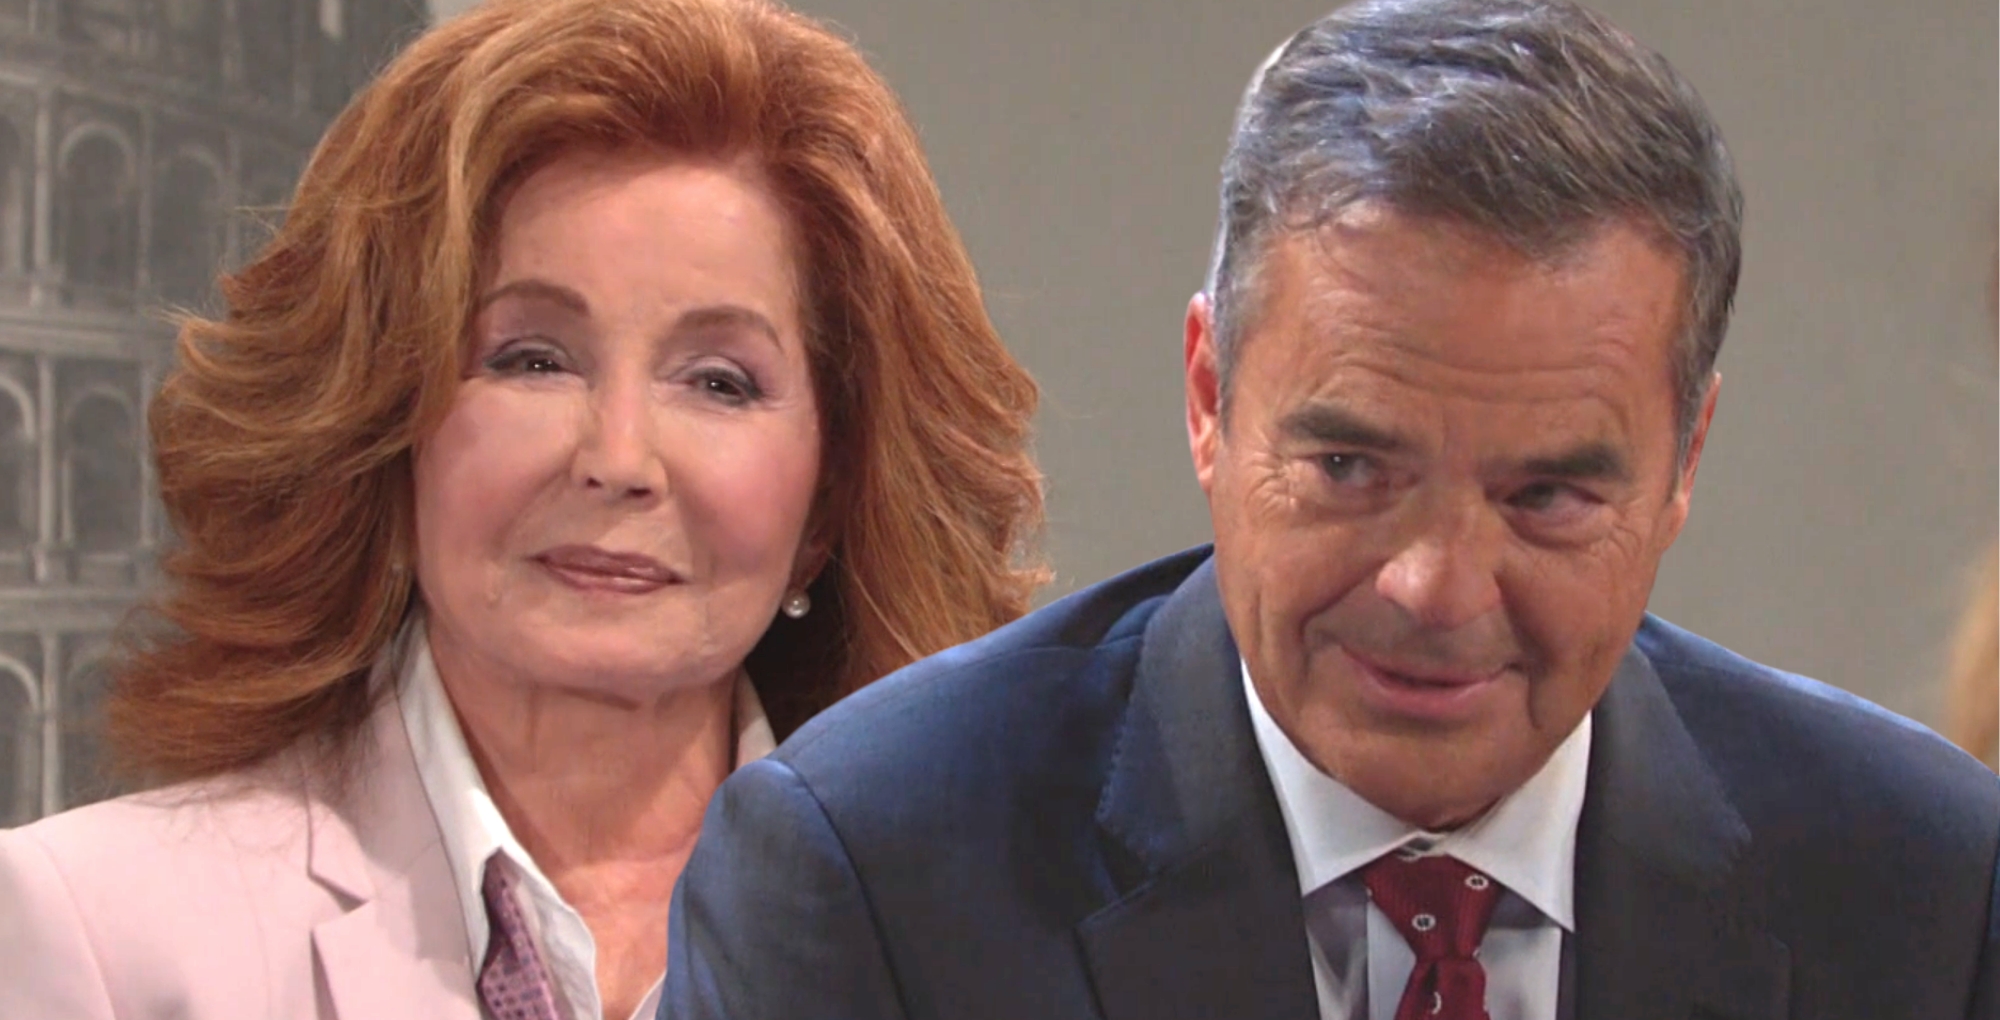 maggie and justin kiriakis on days of our lives.